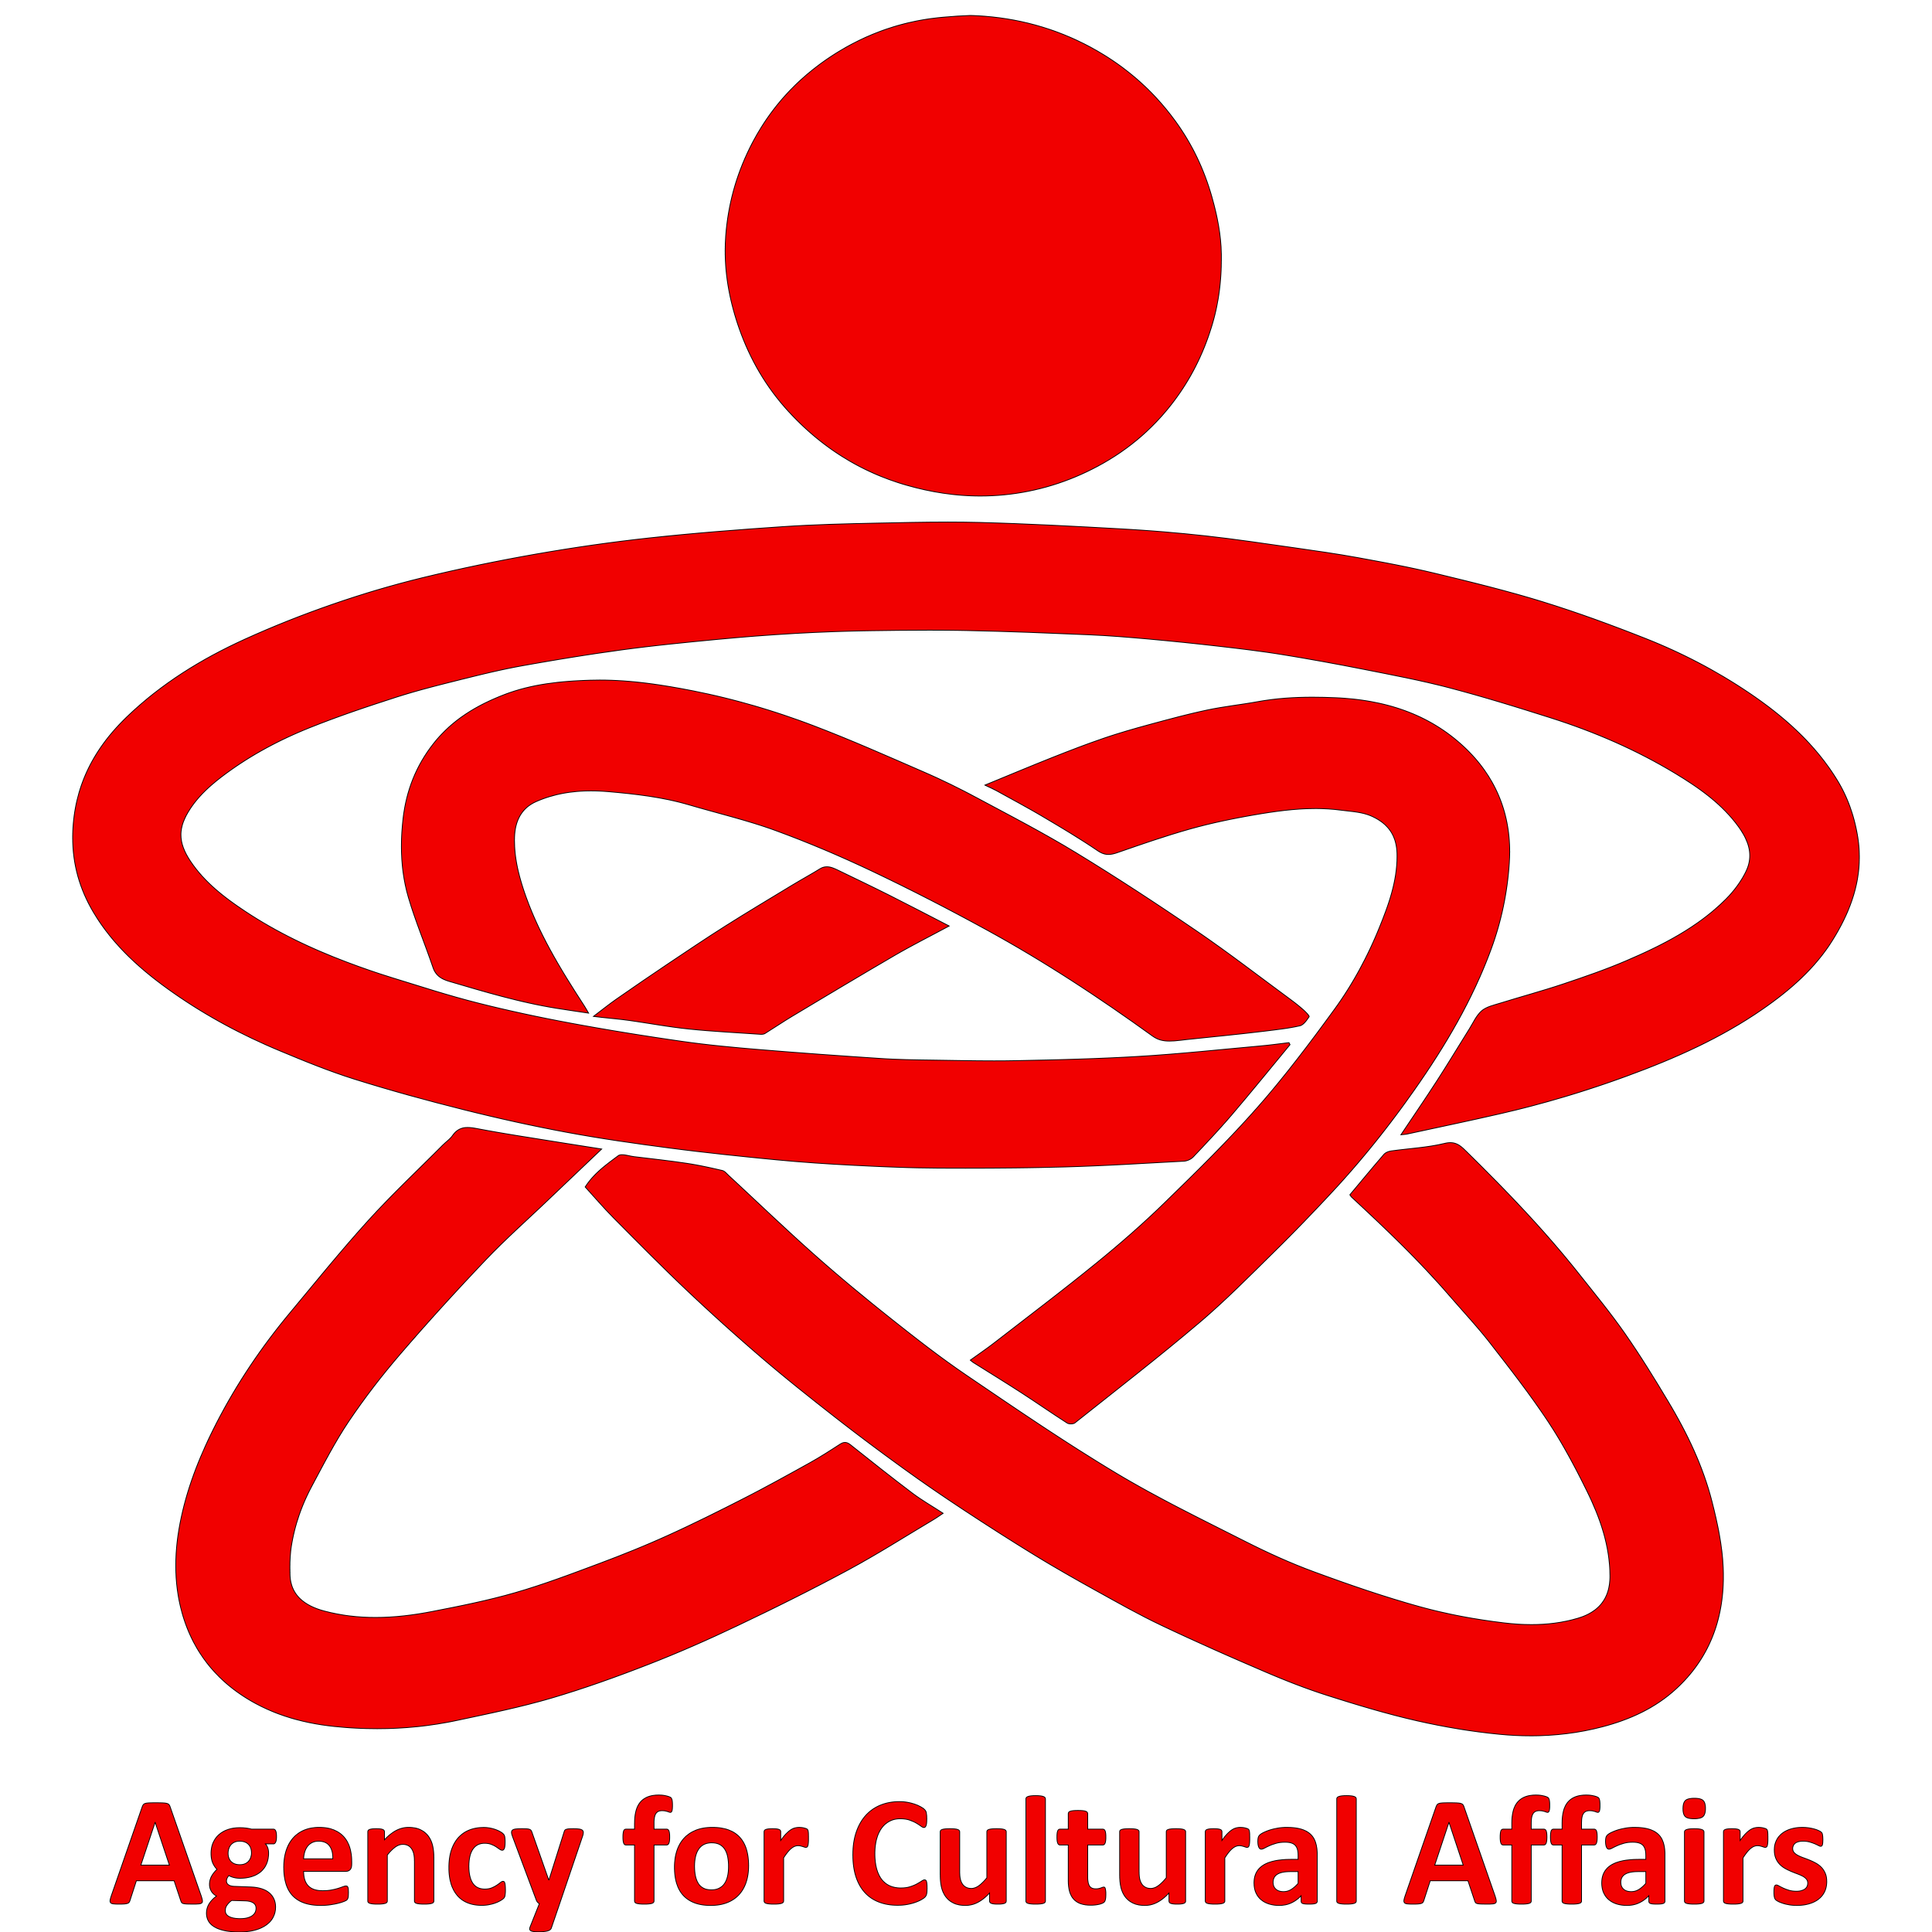 Agency for Cultural Affairs.png